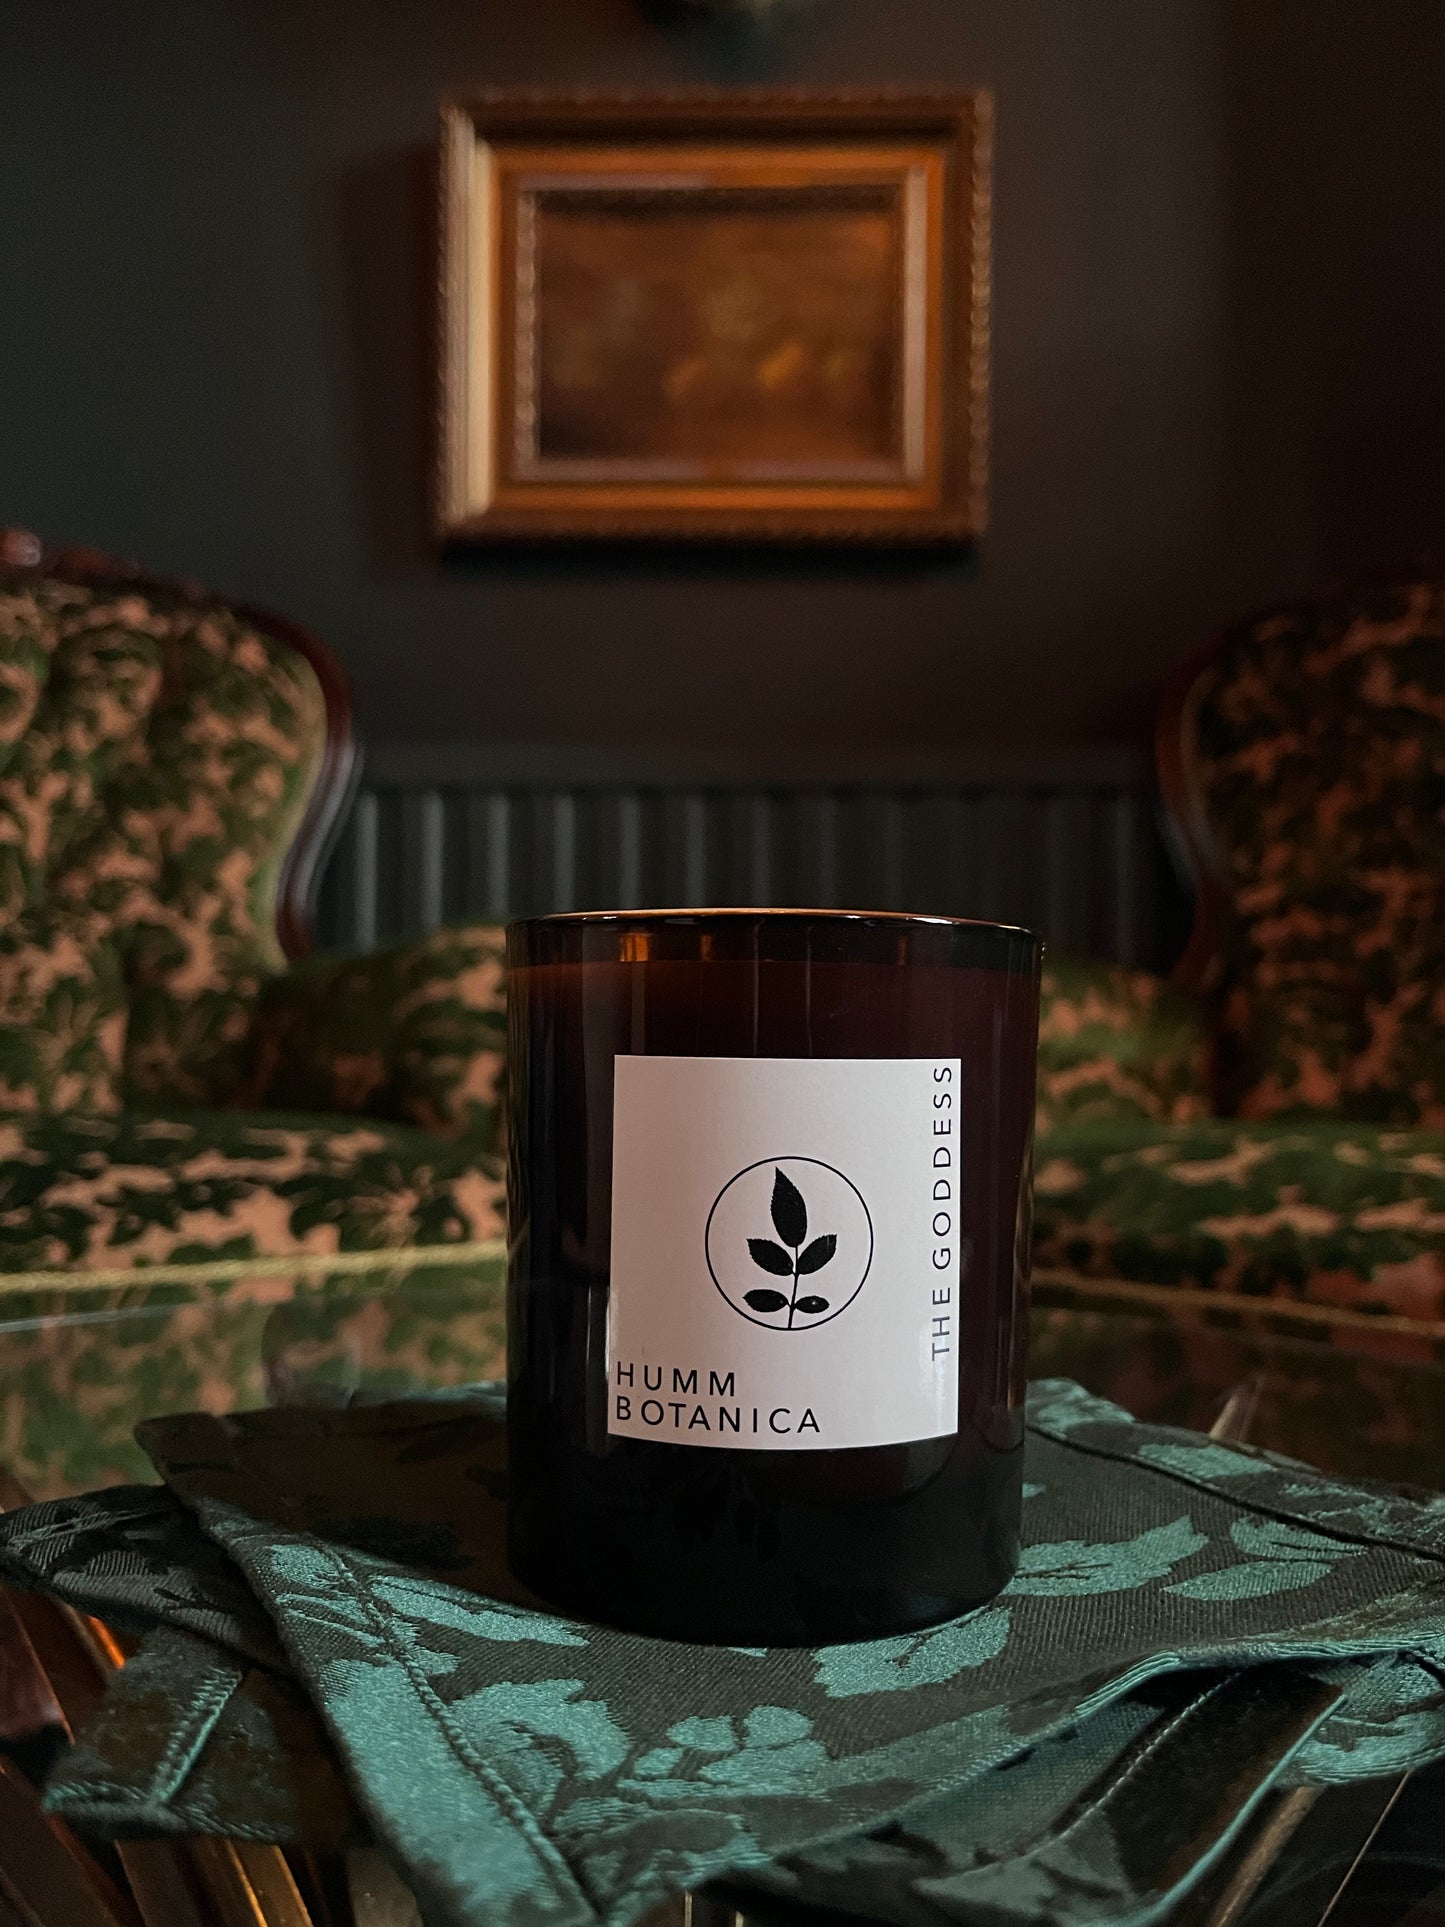 The Goddess Candle